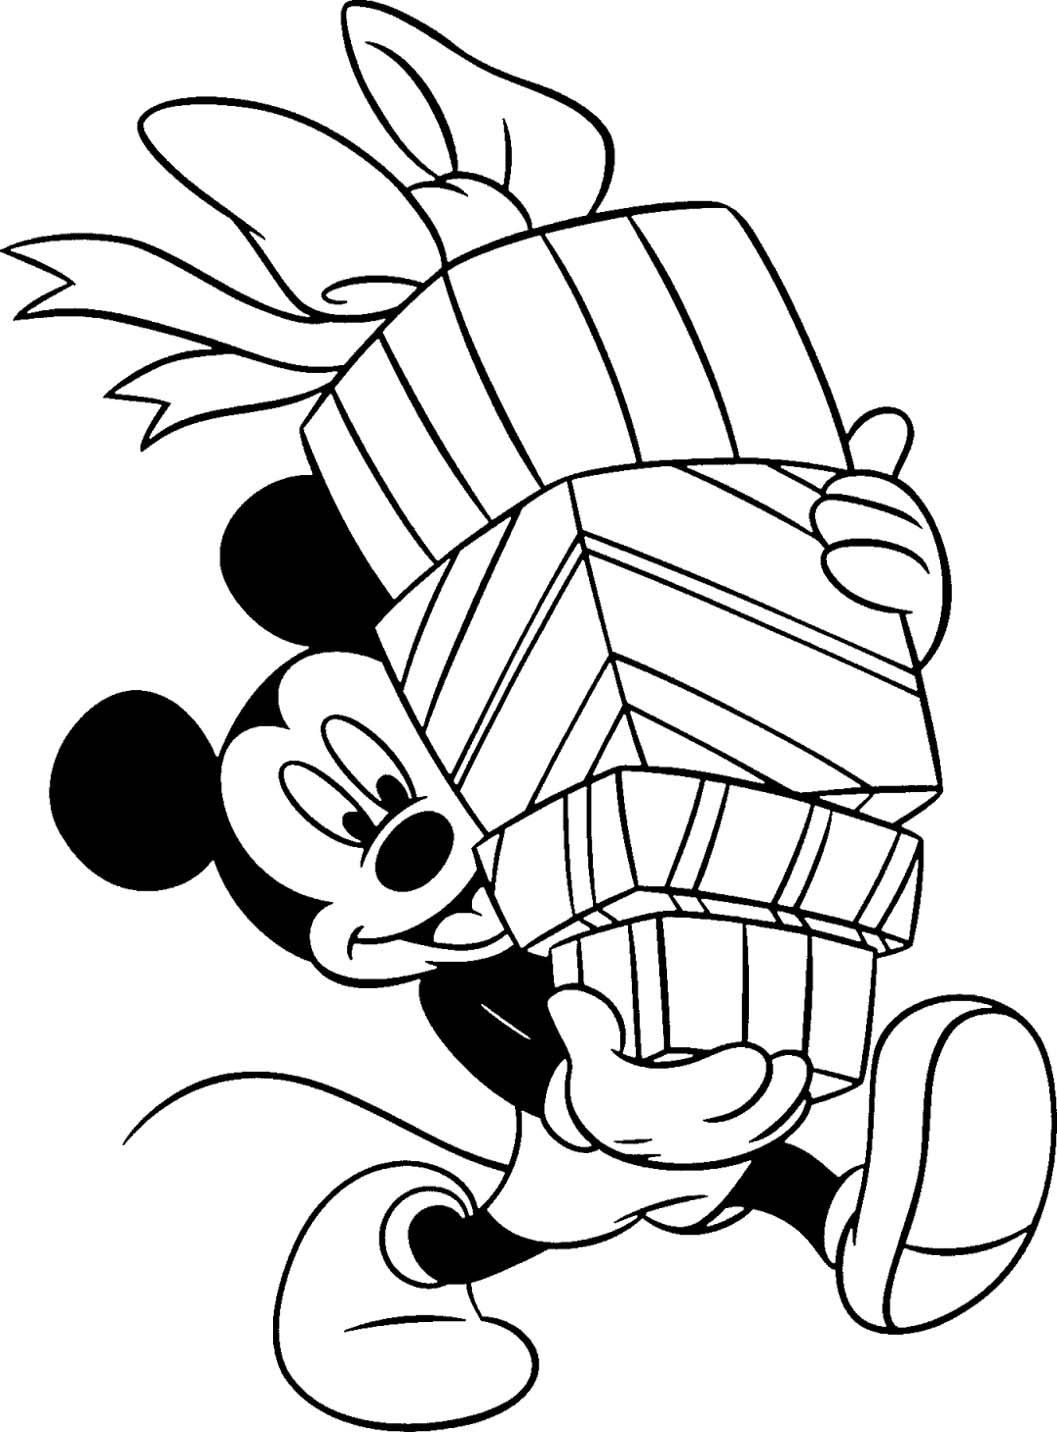 Mickey Mouse Christmas Coloring Pages - Best Coloring Pages For Kids